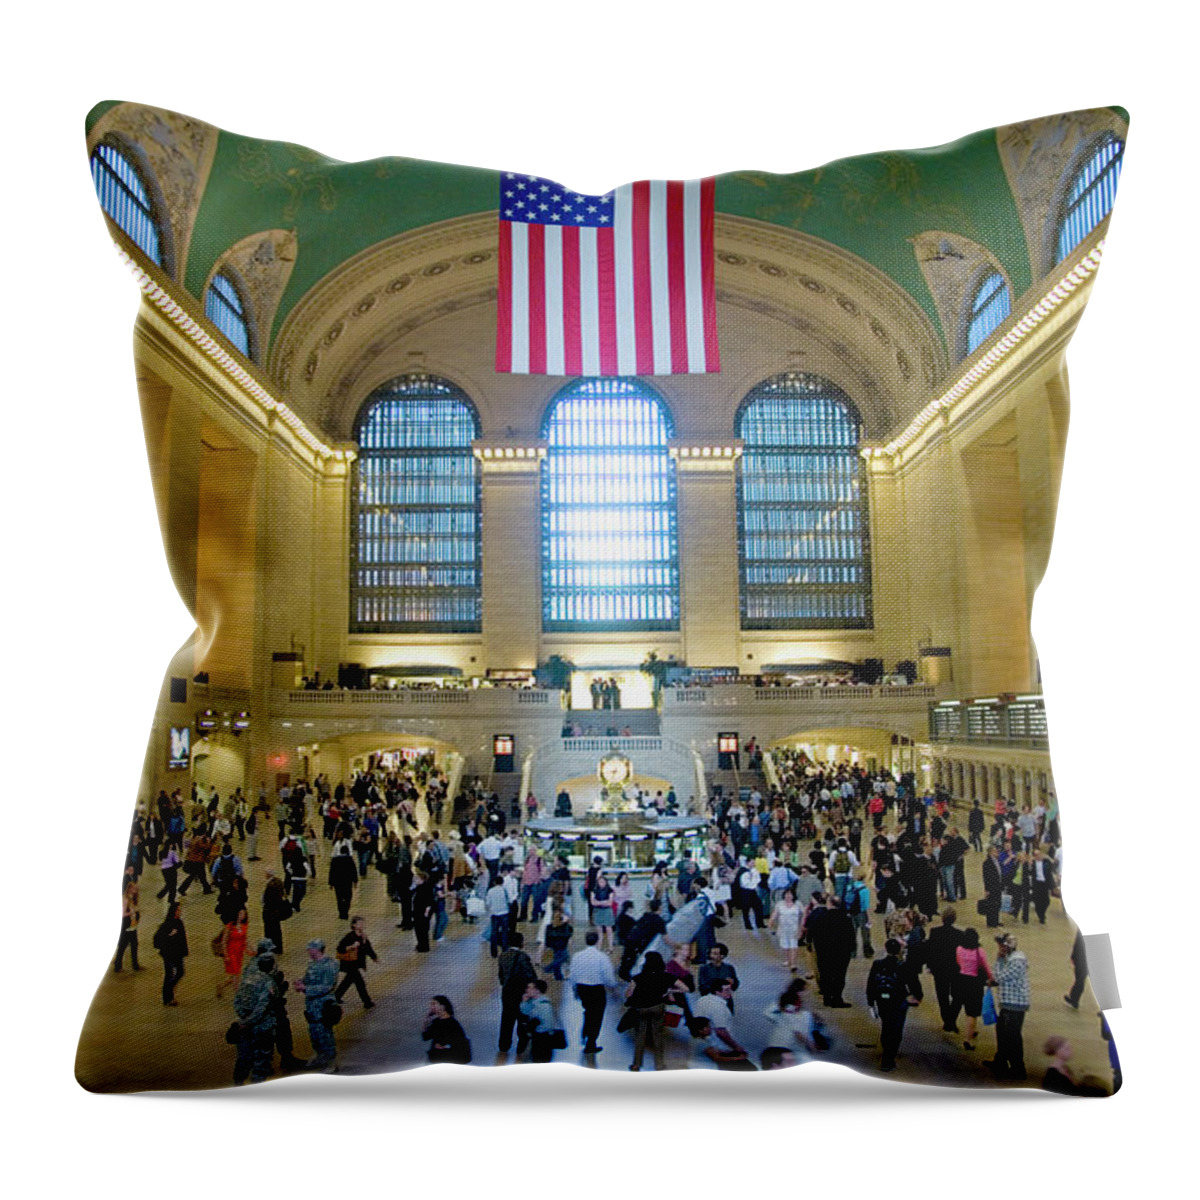 People Throw Pillow featuring the photograph Grand Central Station, New York City, Ny by Visionsofamerica/joe Sohm